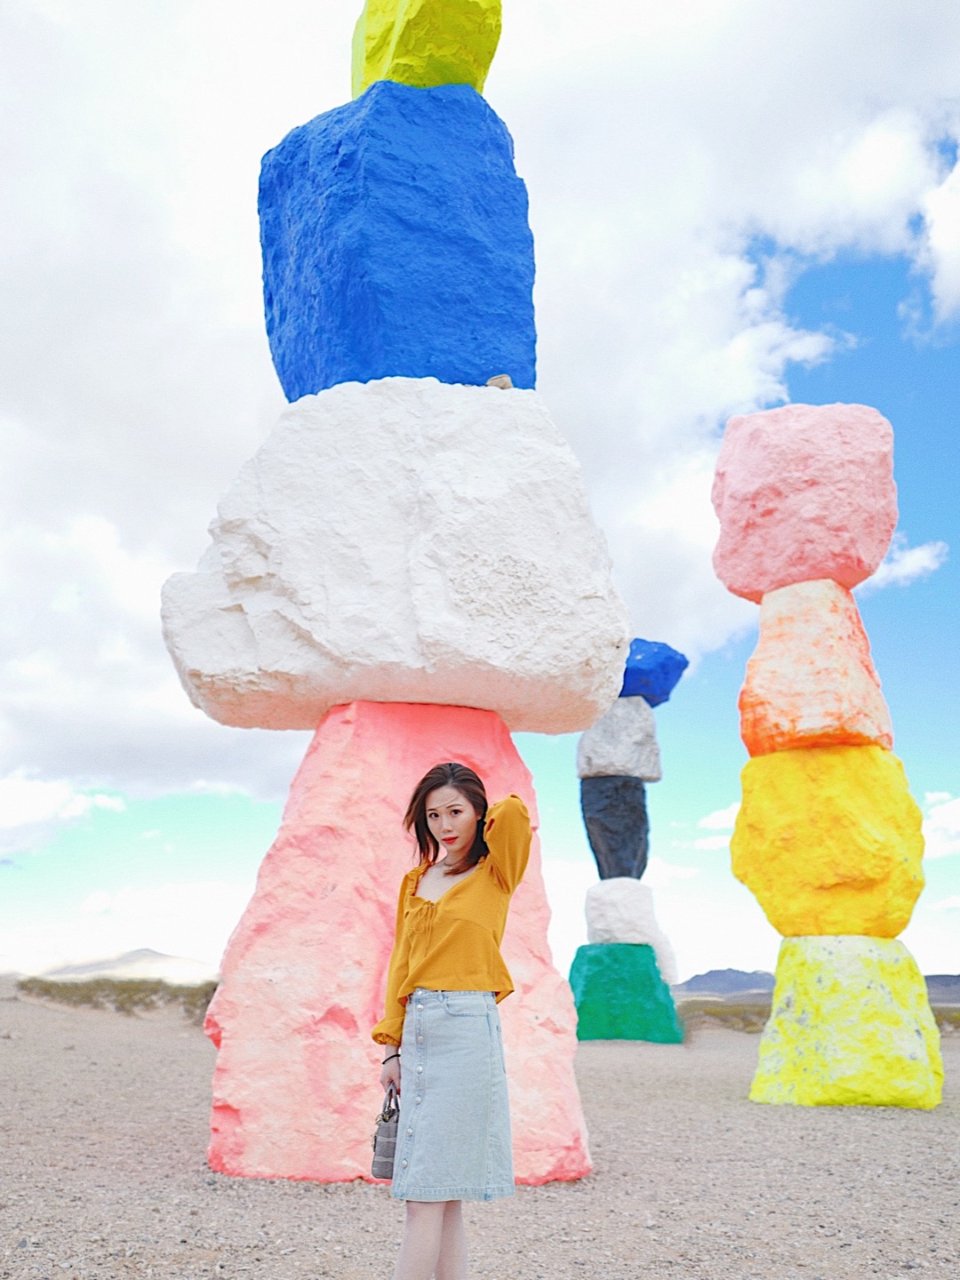 Finders Keepers,A.P.C.,Seven magic mountains